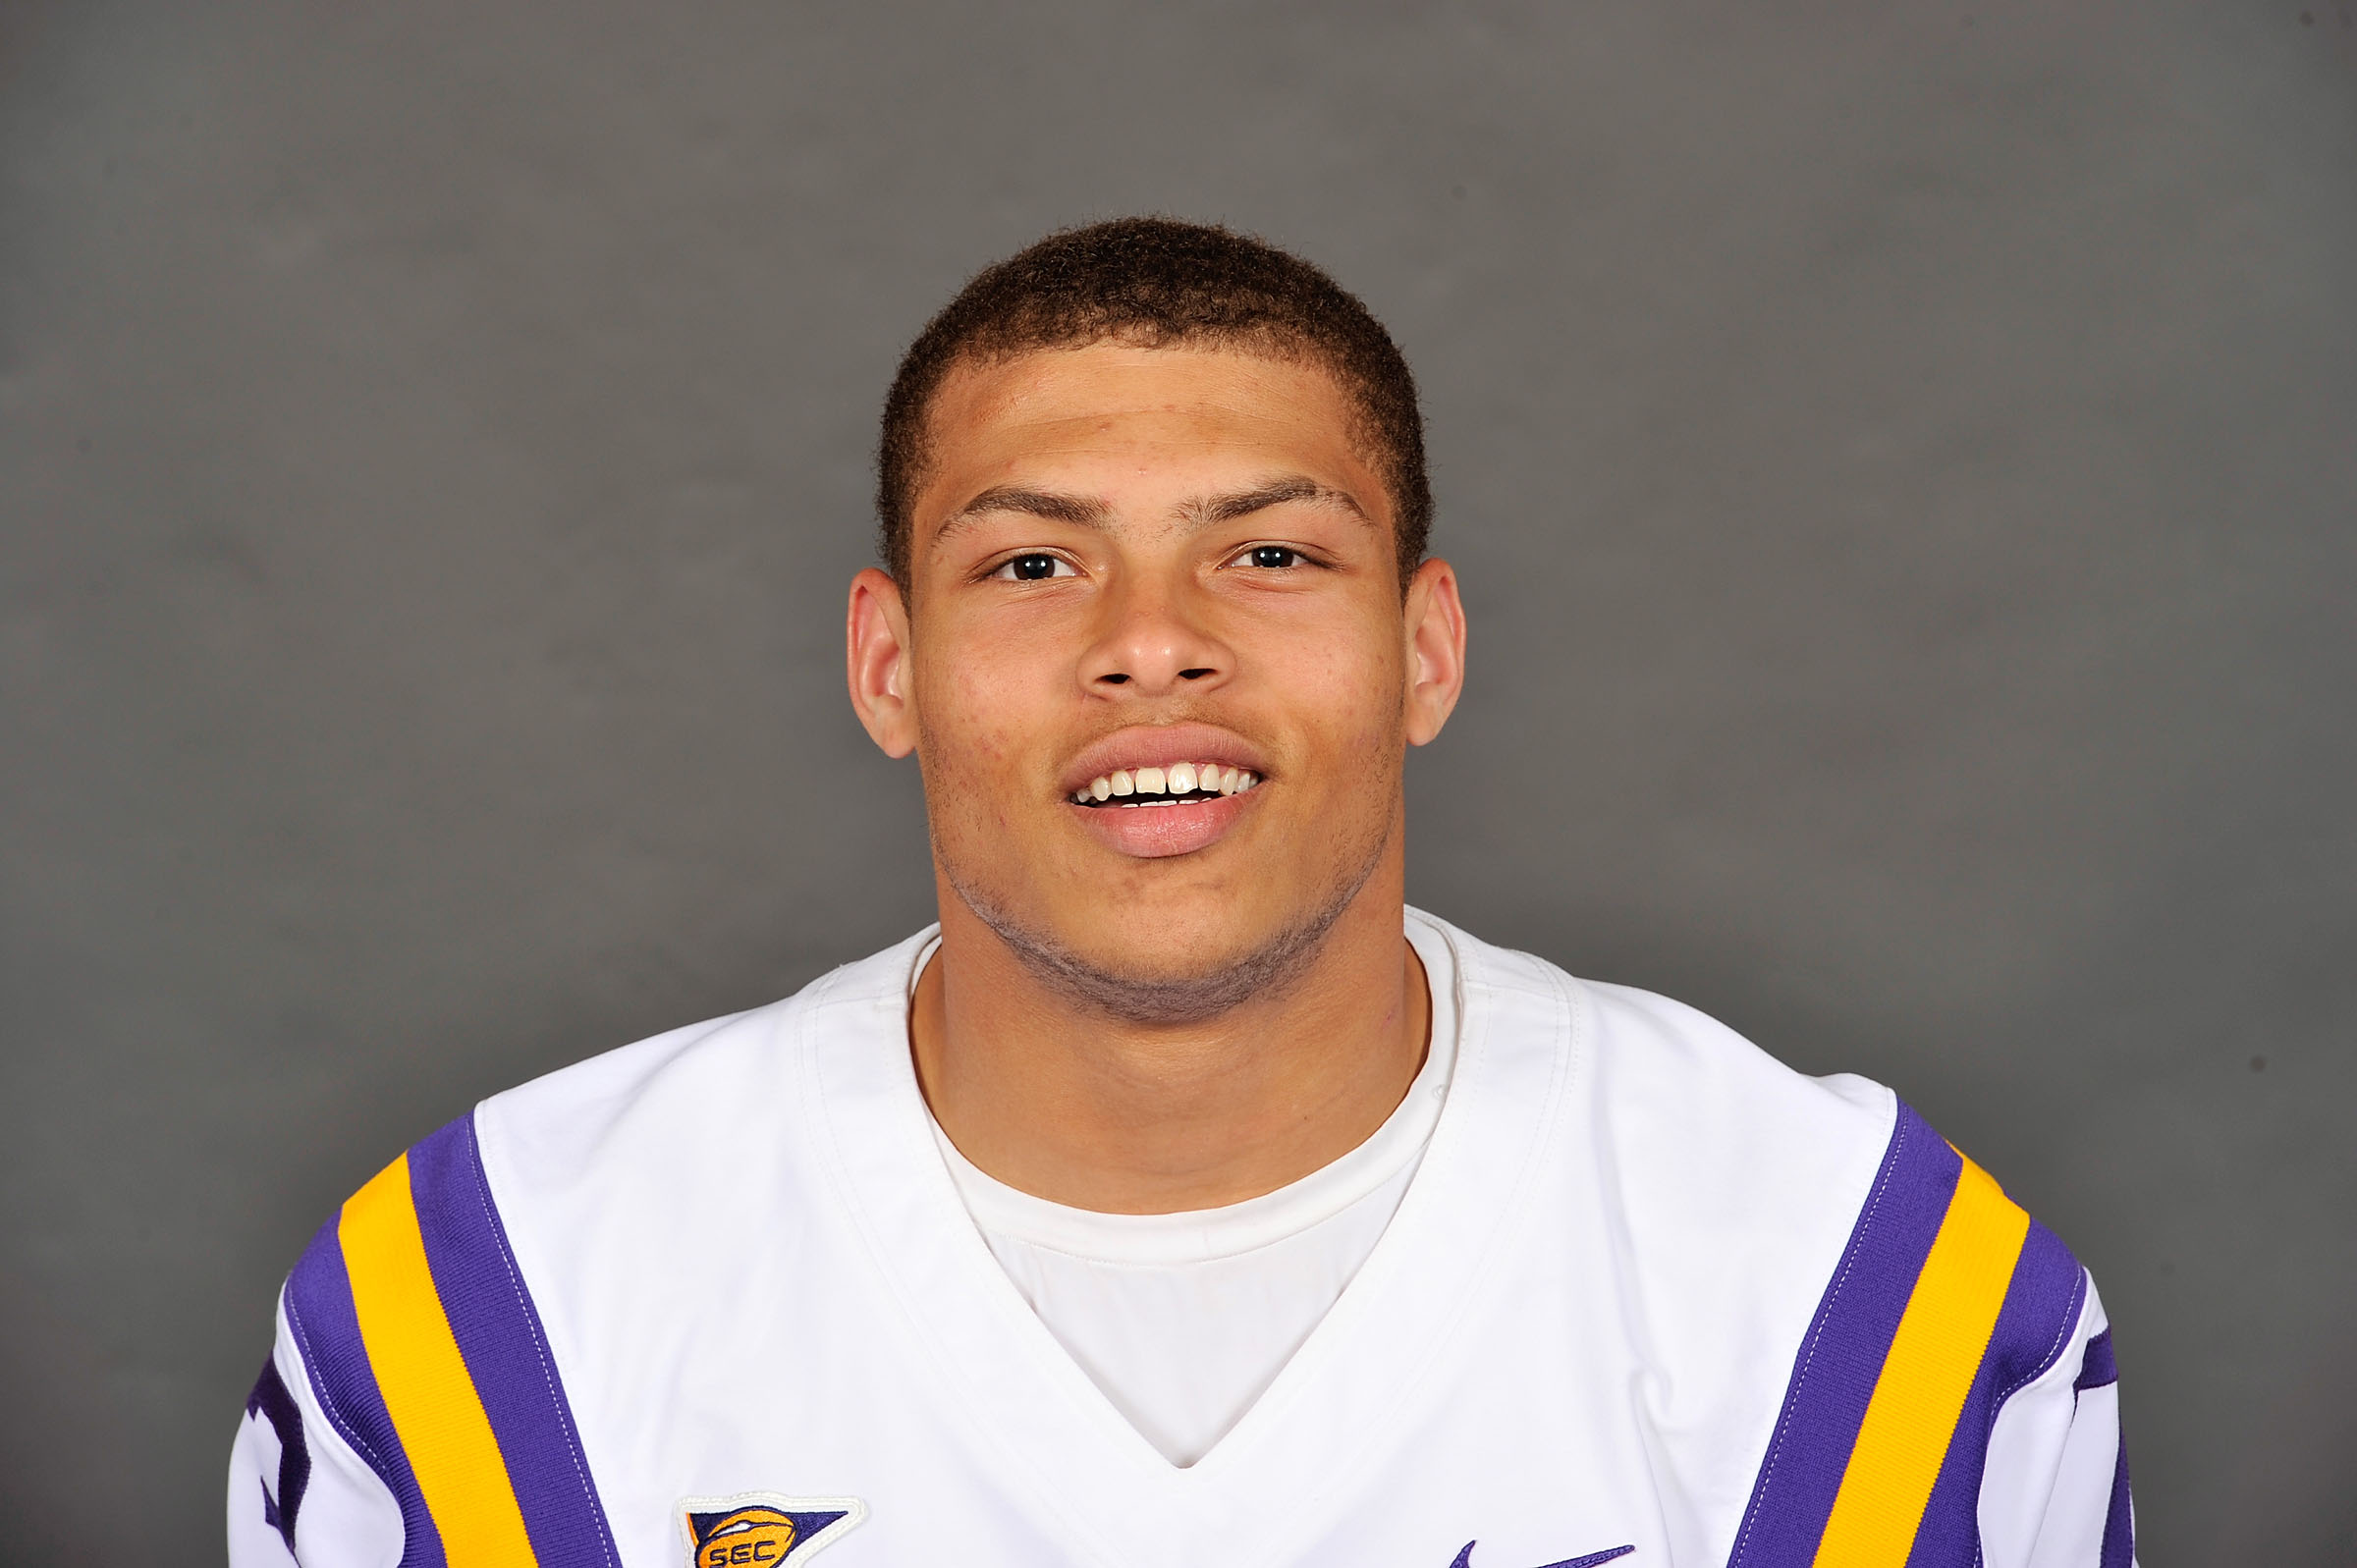 LSU cornerback Tyrann Mathieu has been dismissed from the team, according t...